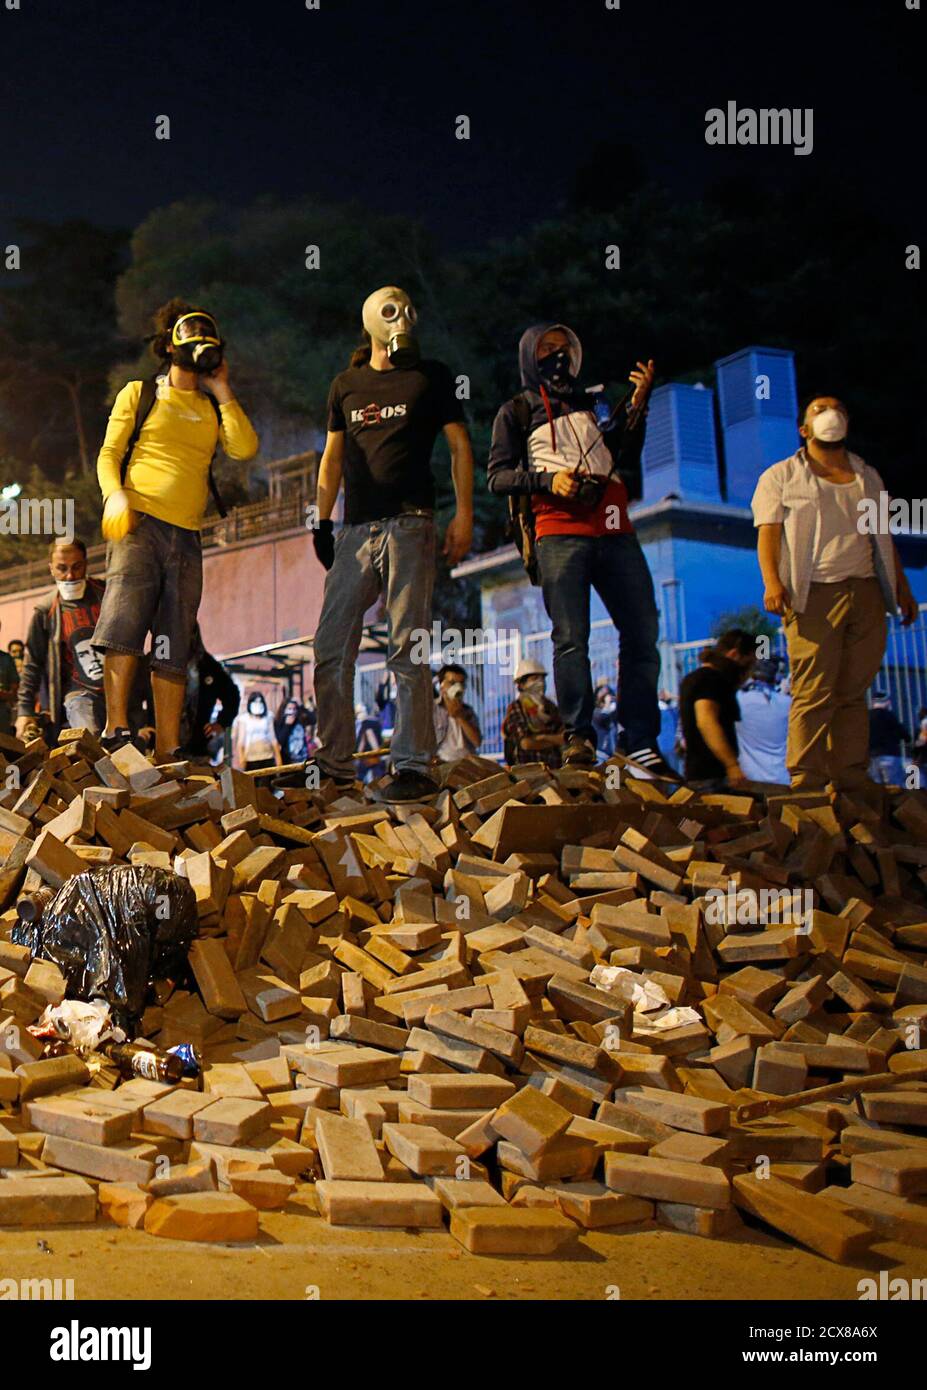 Anti-government protesters stand on a barricade during an anti-government protest in Istanbul June 3, 2013. Turkish Prime Minister Tayyip Erdogan accused anti-government protesters on Monday of walking 'arm-in-arm with terrorism', remarks that could further inflame public anger after three days of some of the most violent riots in decades. Hundreds of police and protesters have been injured since Friday in the riots, which began with a demonstration to halt construction in a park in an Istanbul square and grew into mass protests against what opponents call Erdogan's authoritarianism. REUTERS/M Stock Photo